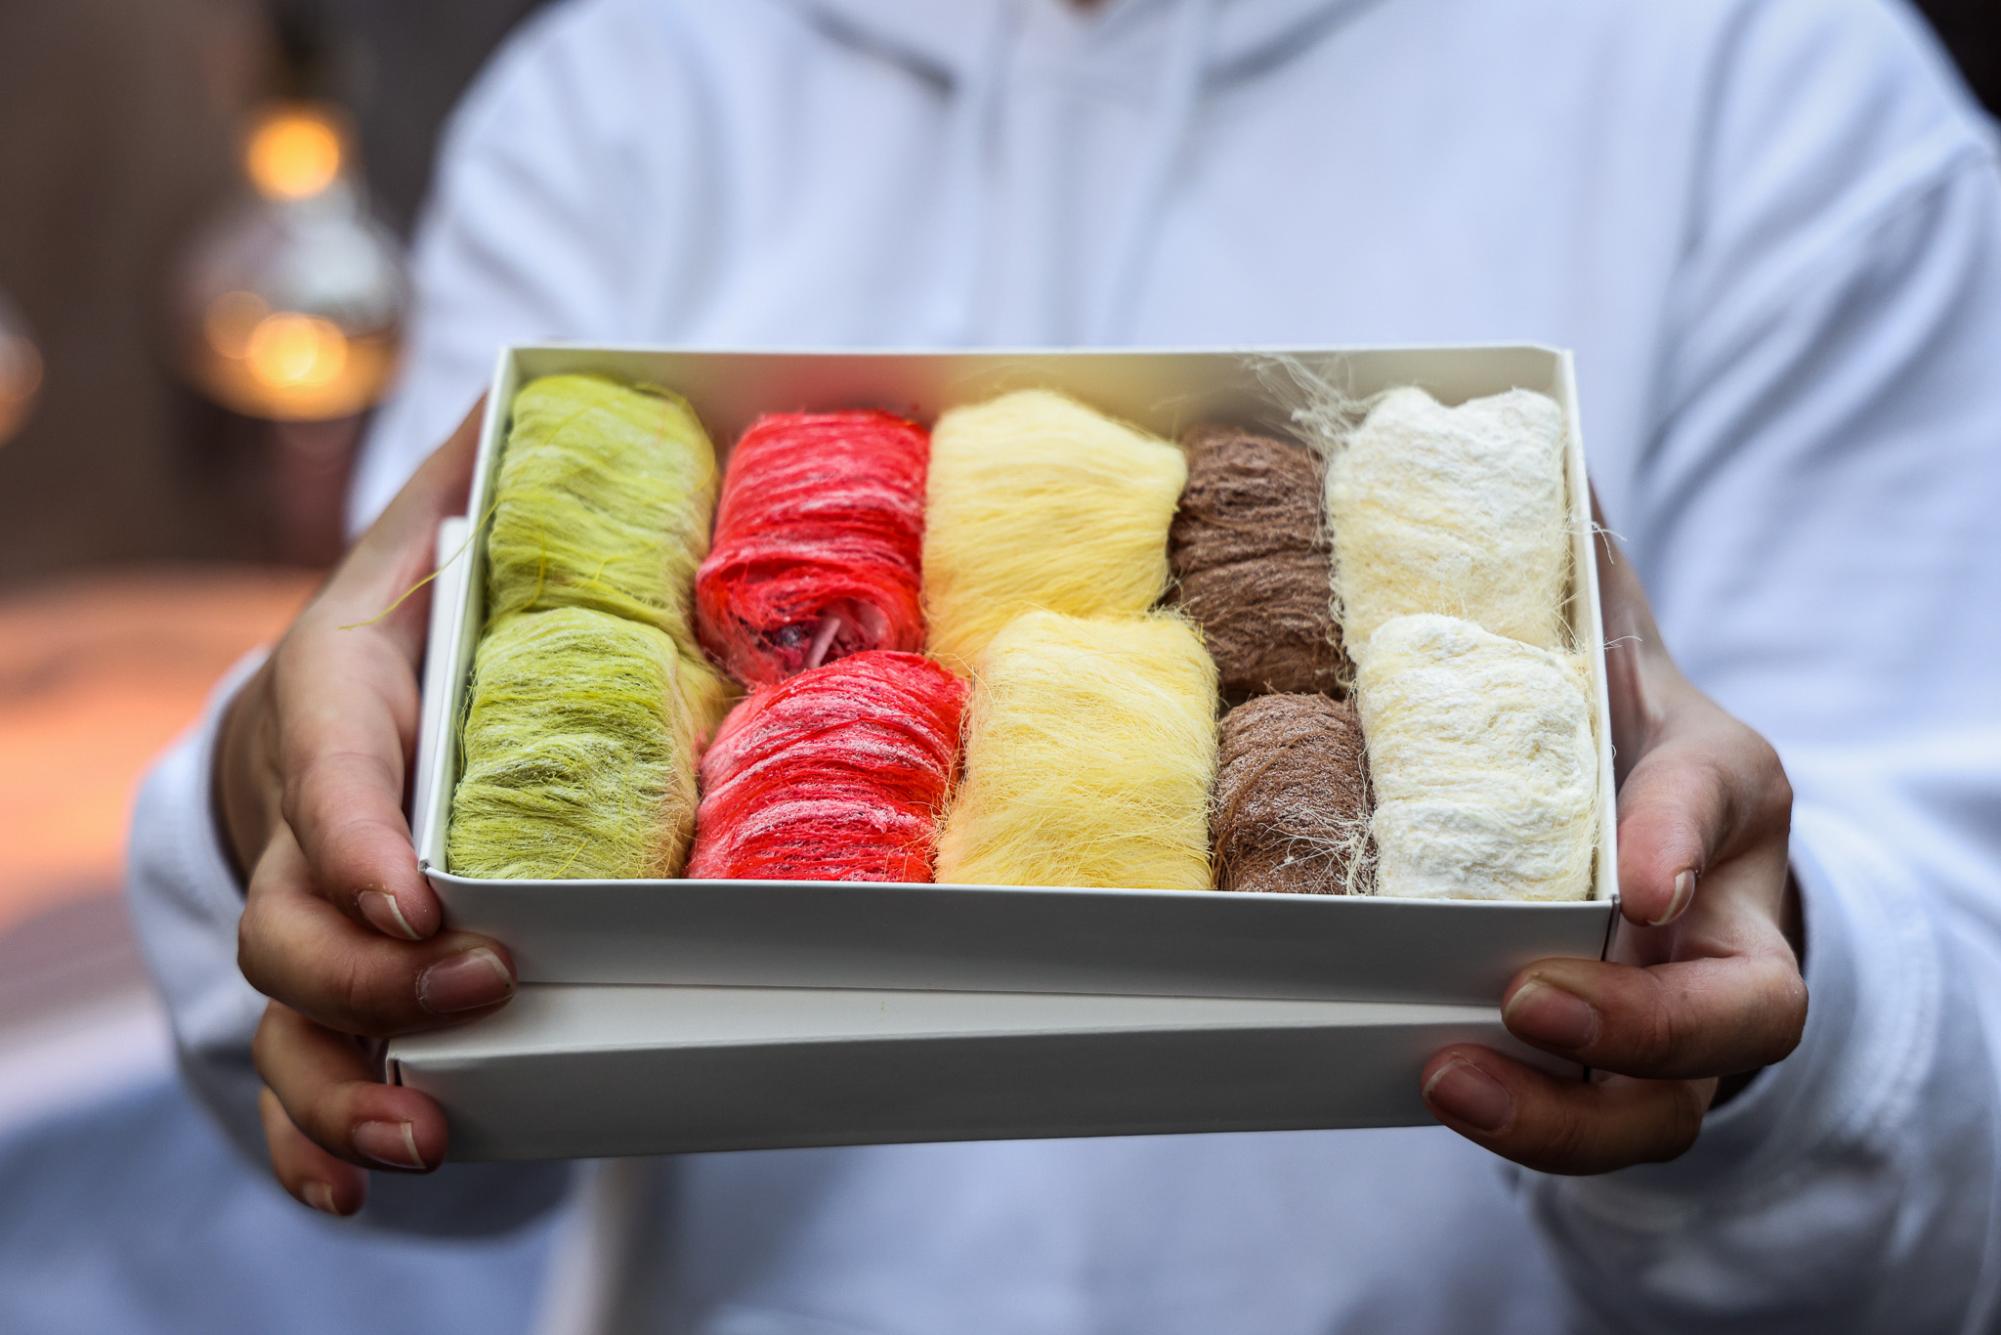 Person holds out a decorative box filled with an arrangement of green, red, yellow, brown and white string candy.